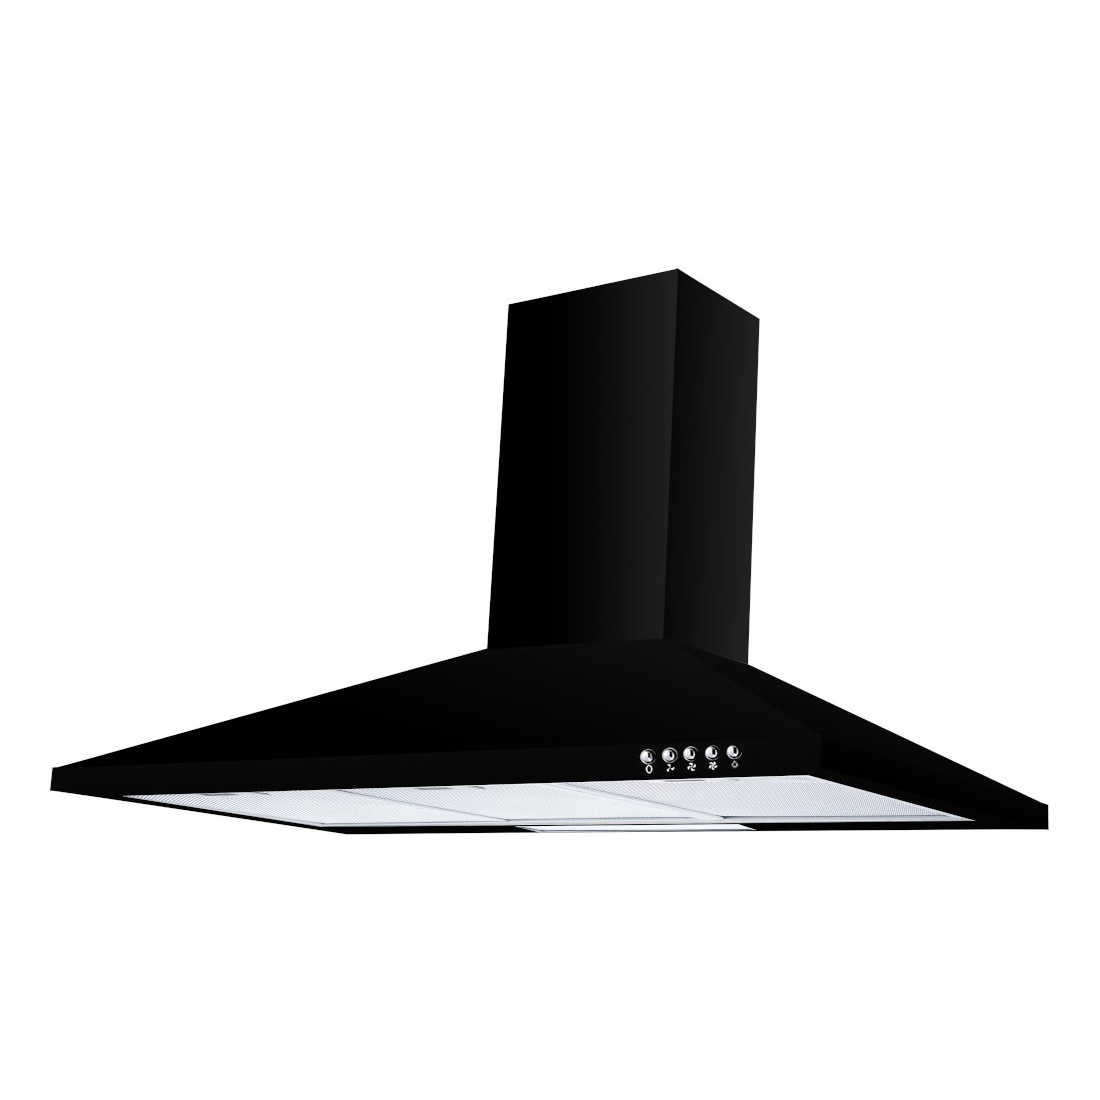 Image of Culina UBSCH90BK 90cm Chimney Hood in Black 3 Speed B Rated